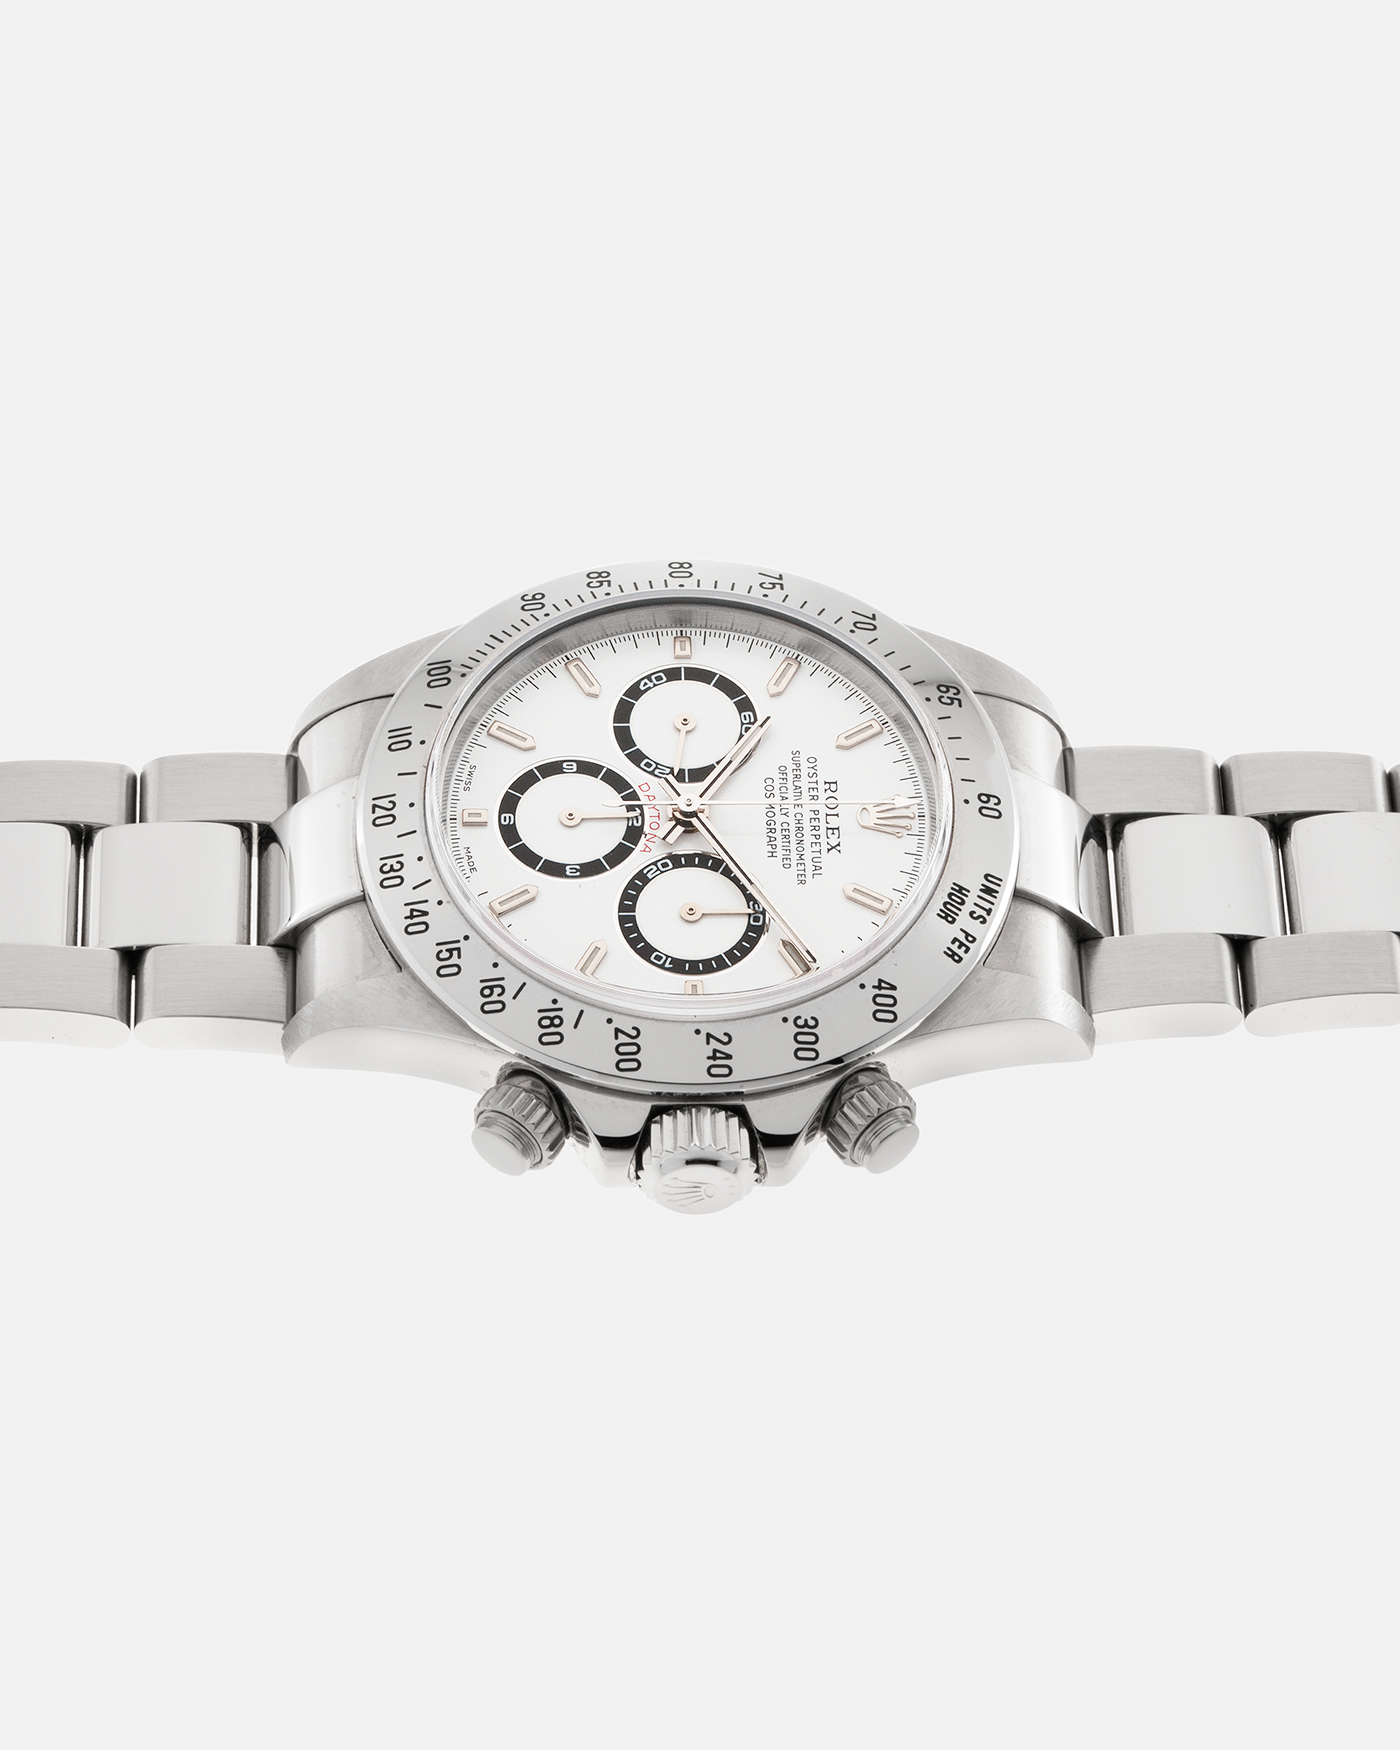 Brand: Rolex Year: 1999 Model: Cosmograph Daytona Reference: 16520 Serial Number: A342XXX Material: Stainless Steel Movement: Rolex (Based on the Zenith El Primero Cal. 400) Cal. 4030, Self-Winding Case Diameter: 40mm Bracelet: Rolex Stainless Steel 78390A Oyster Bracelet